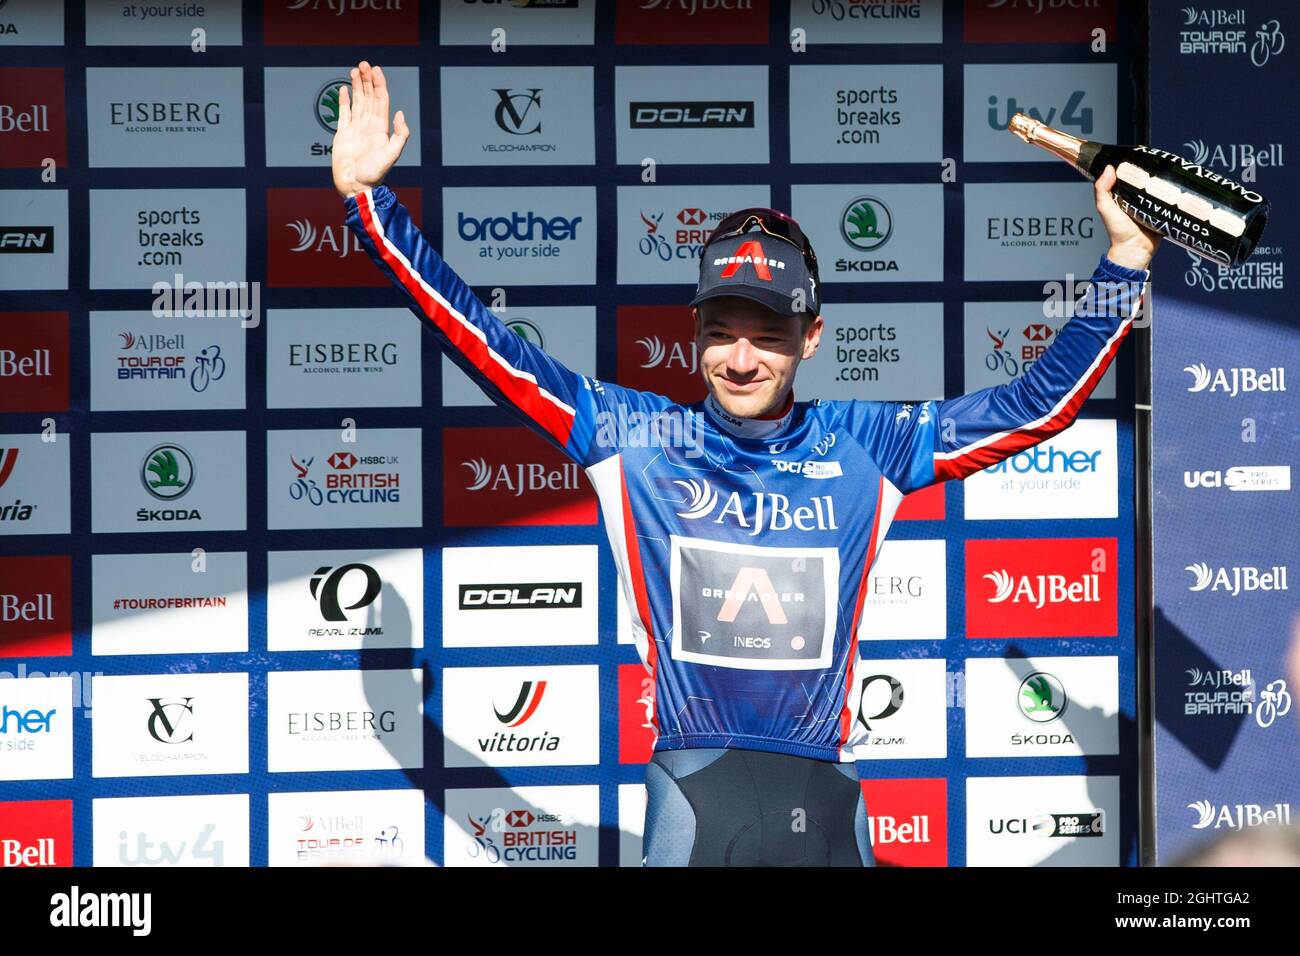 National Botanic Garden of Wales, Llanarthne, Wales, UK. Tuesday 7 September 2021.  Stage 3 of the Tour of Britain cycling race. Ethan Hayter (GBR) of INEOS Grenadiers celebrates being crowned race leader after the Stage 3 time trial. Credit: Gruffydd Thomas/Alamy Stock Photo